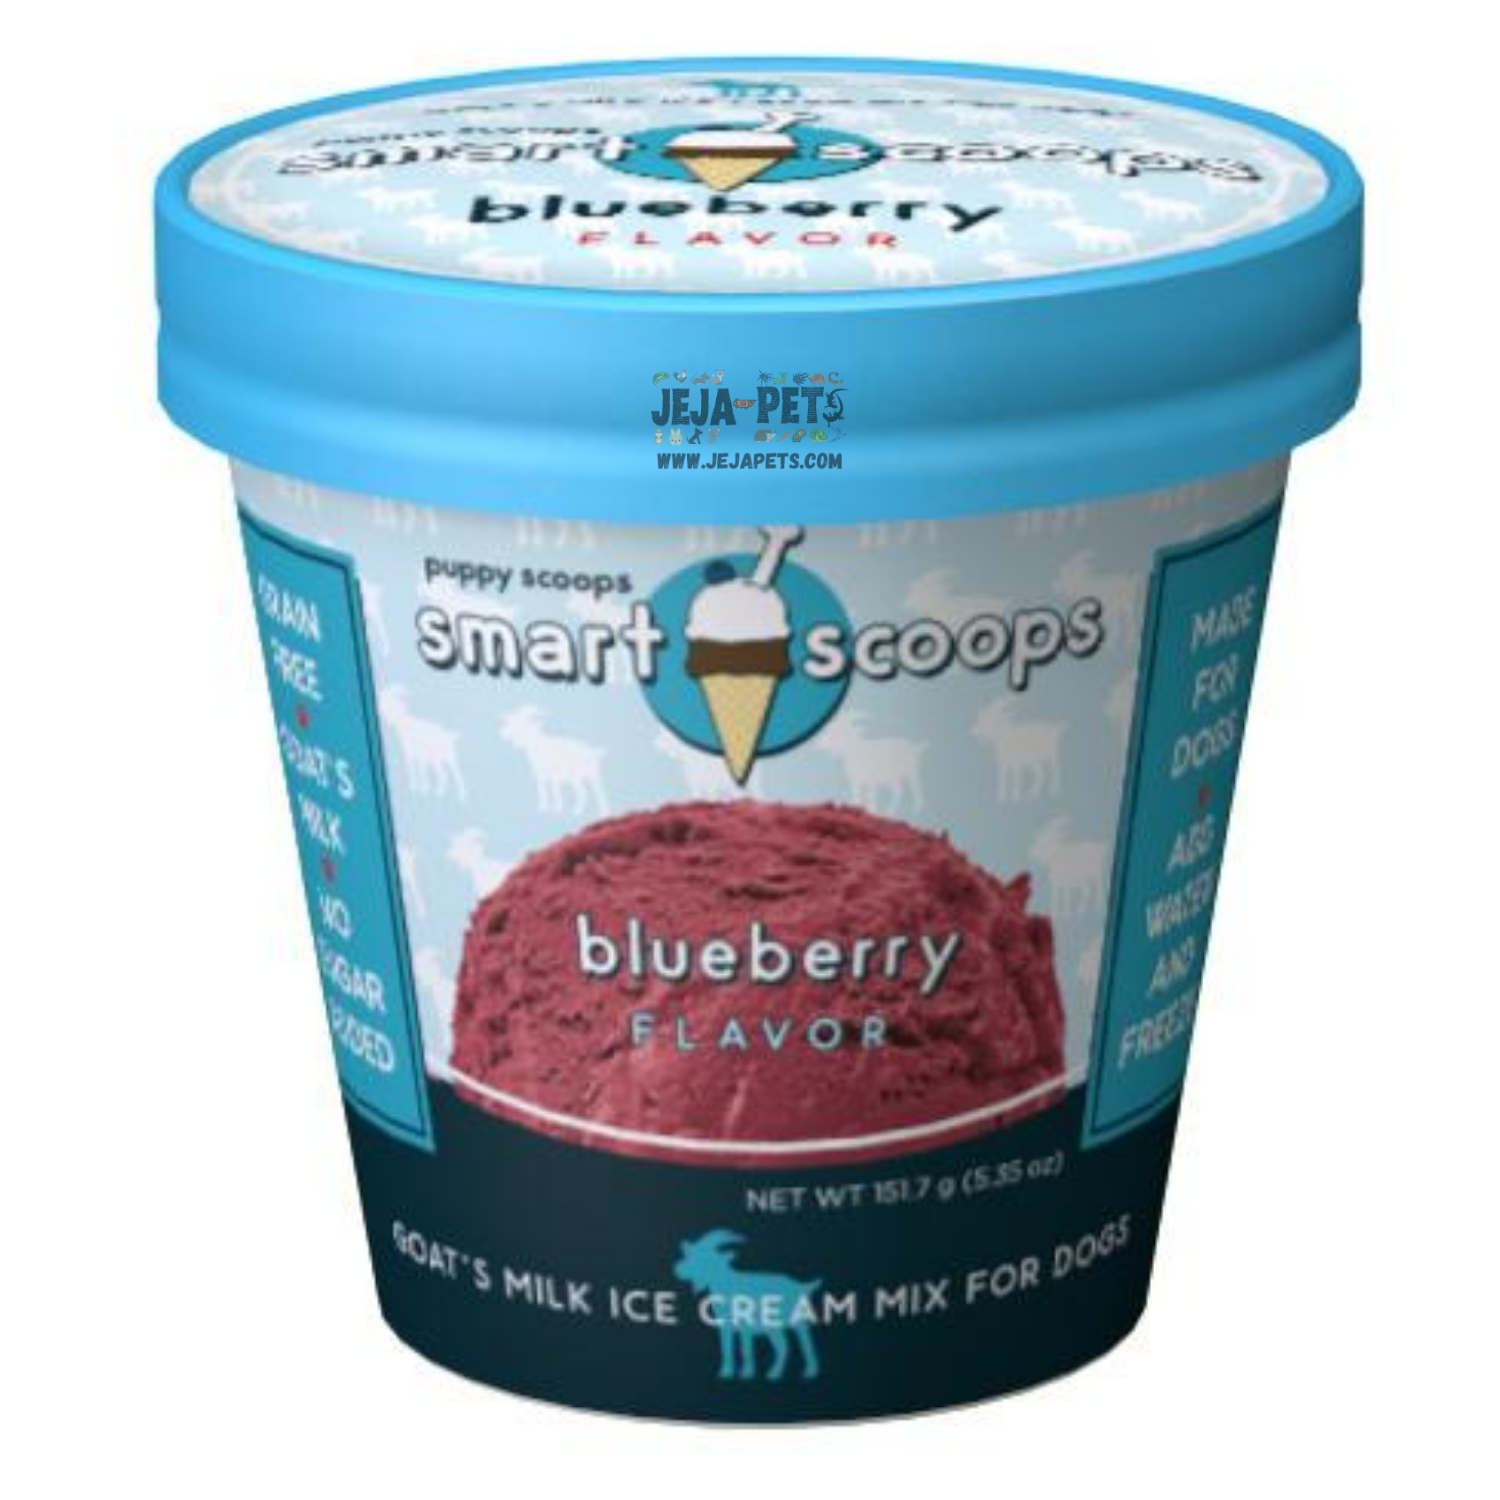 [DISCONTINUED] Puppy Cakes Smart Scoops Goat's Milk Ice Cream Mix (Blueberry) - 150g